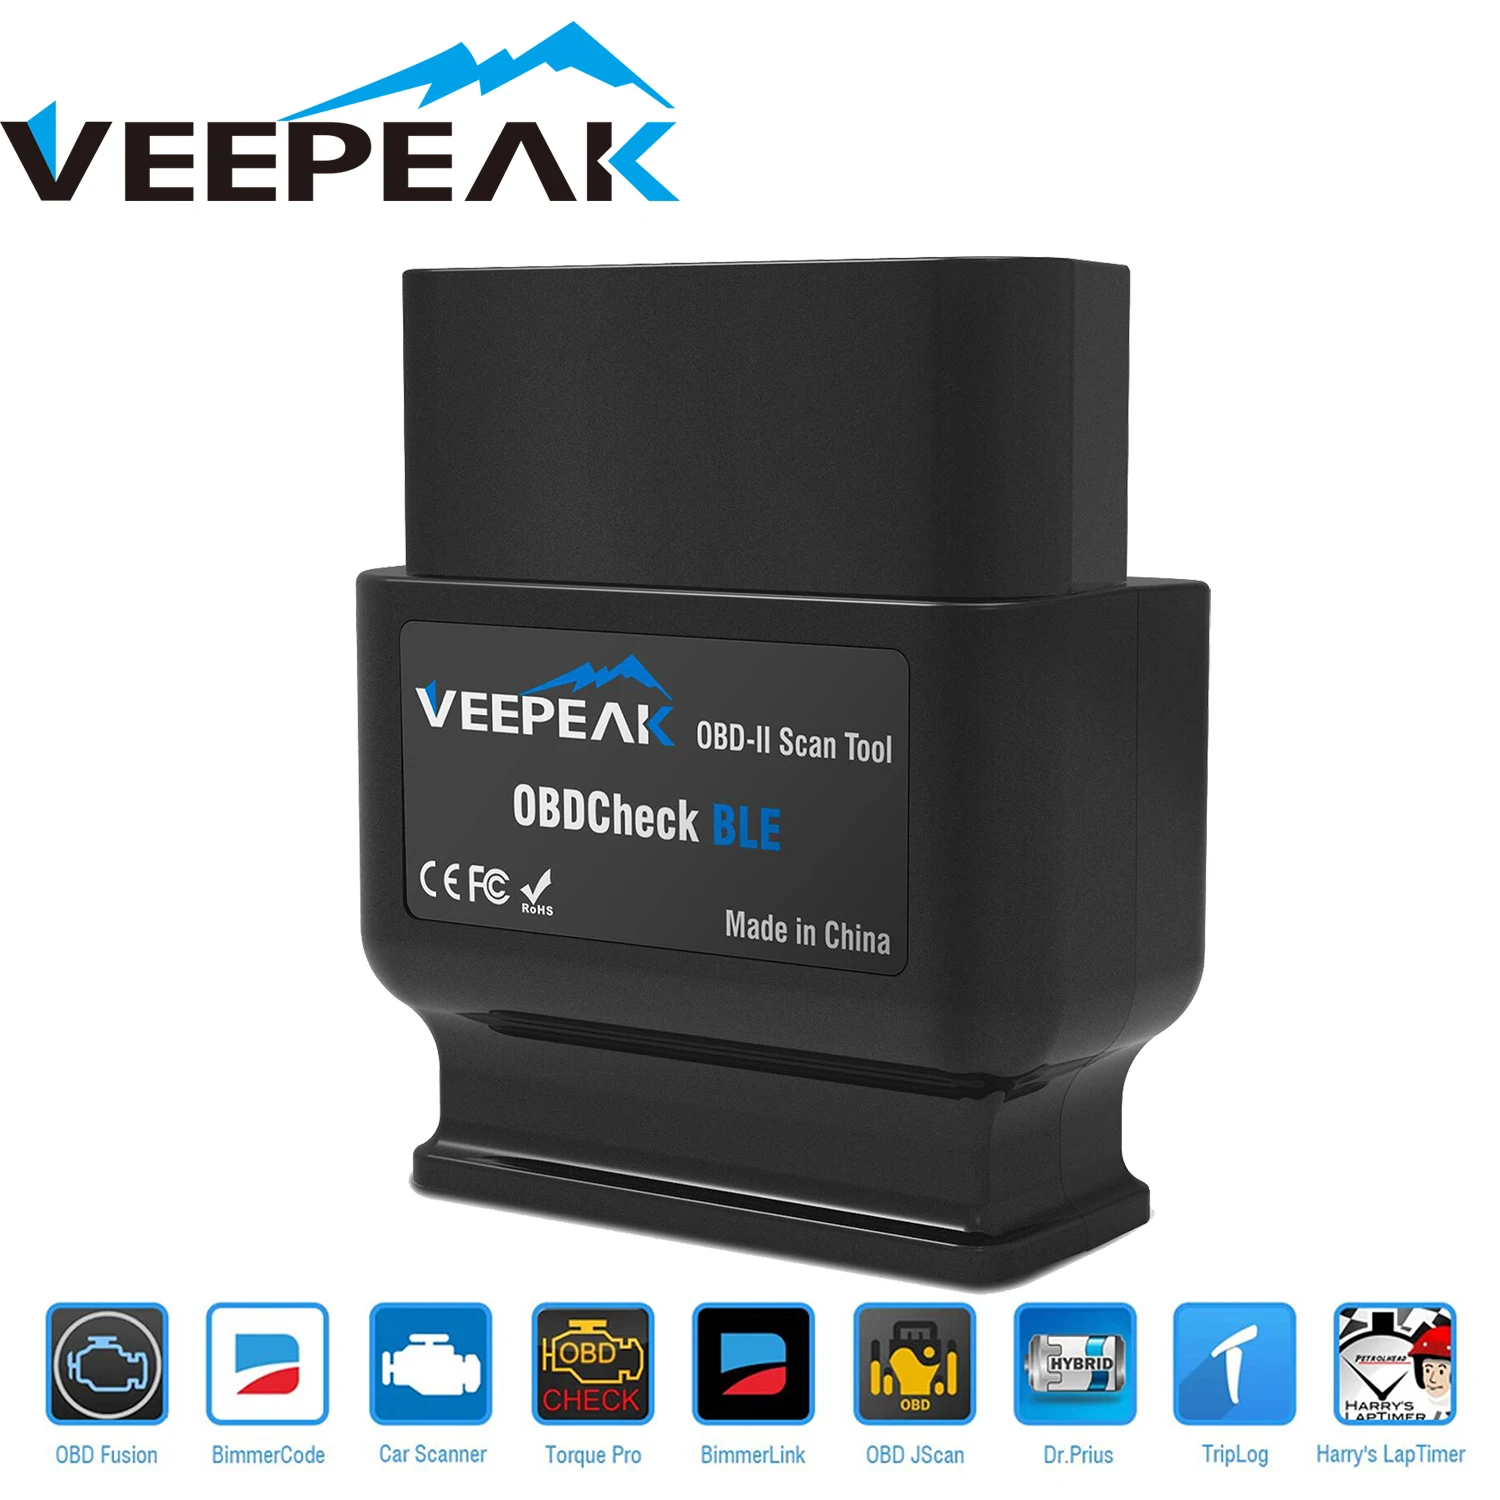 Veepeak OBDCheck BLE OBD2 Bluetooth Scanner Auto OBD II Diagnostic Scan Tool for iOS & Android, BT4.0 Car Check Engine